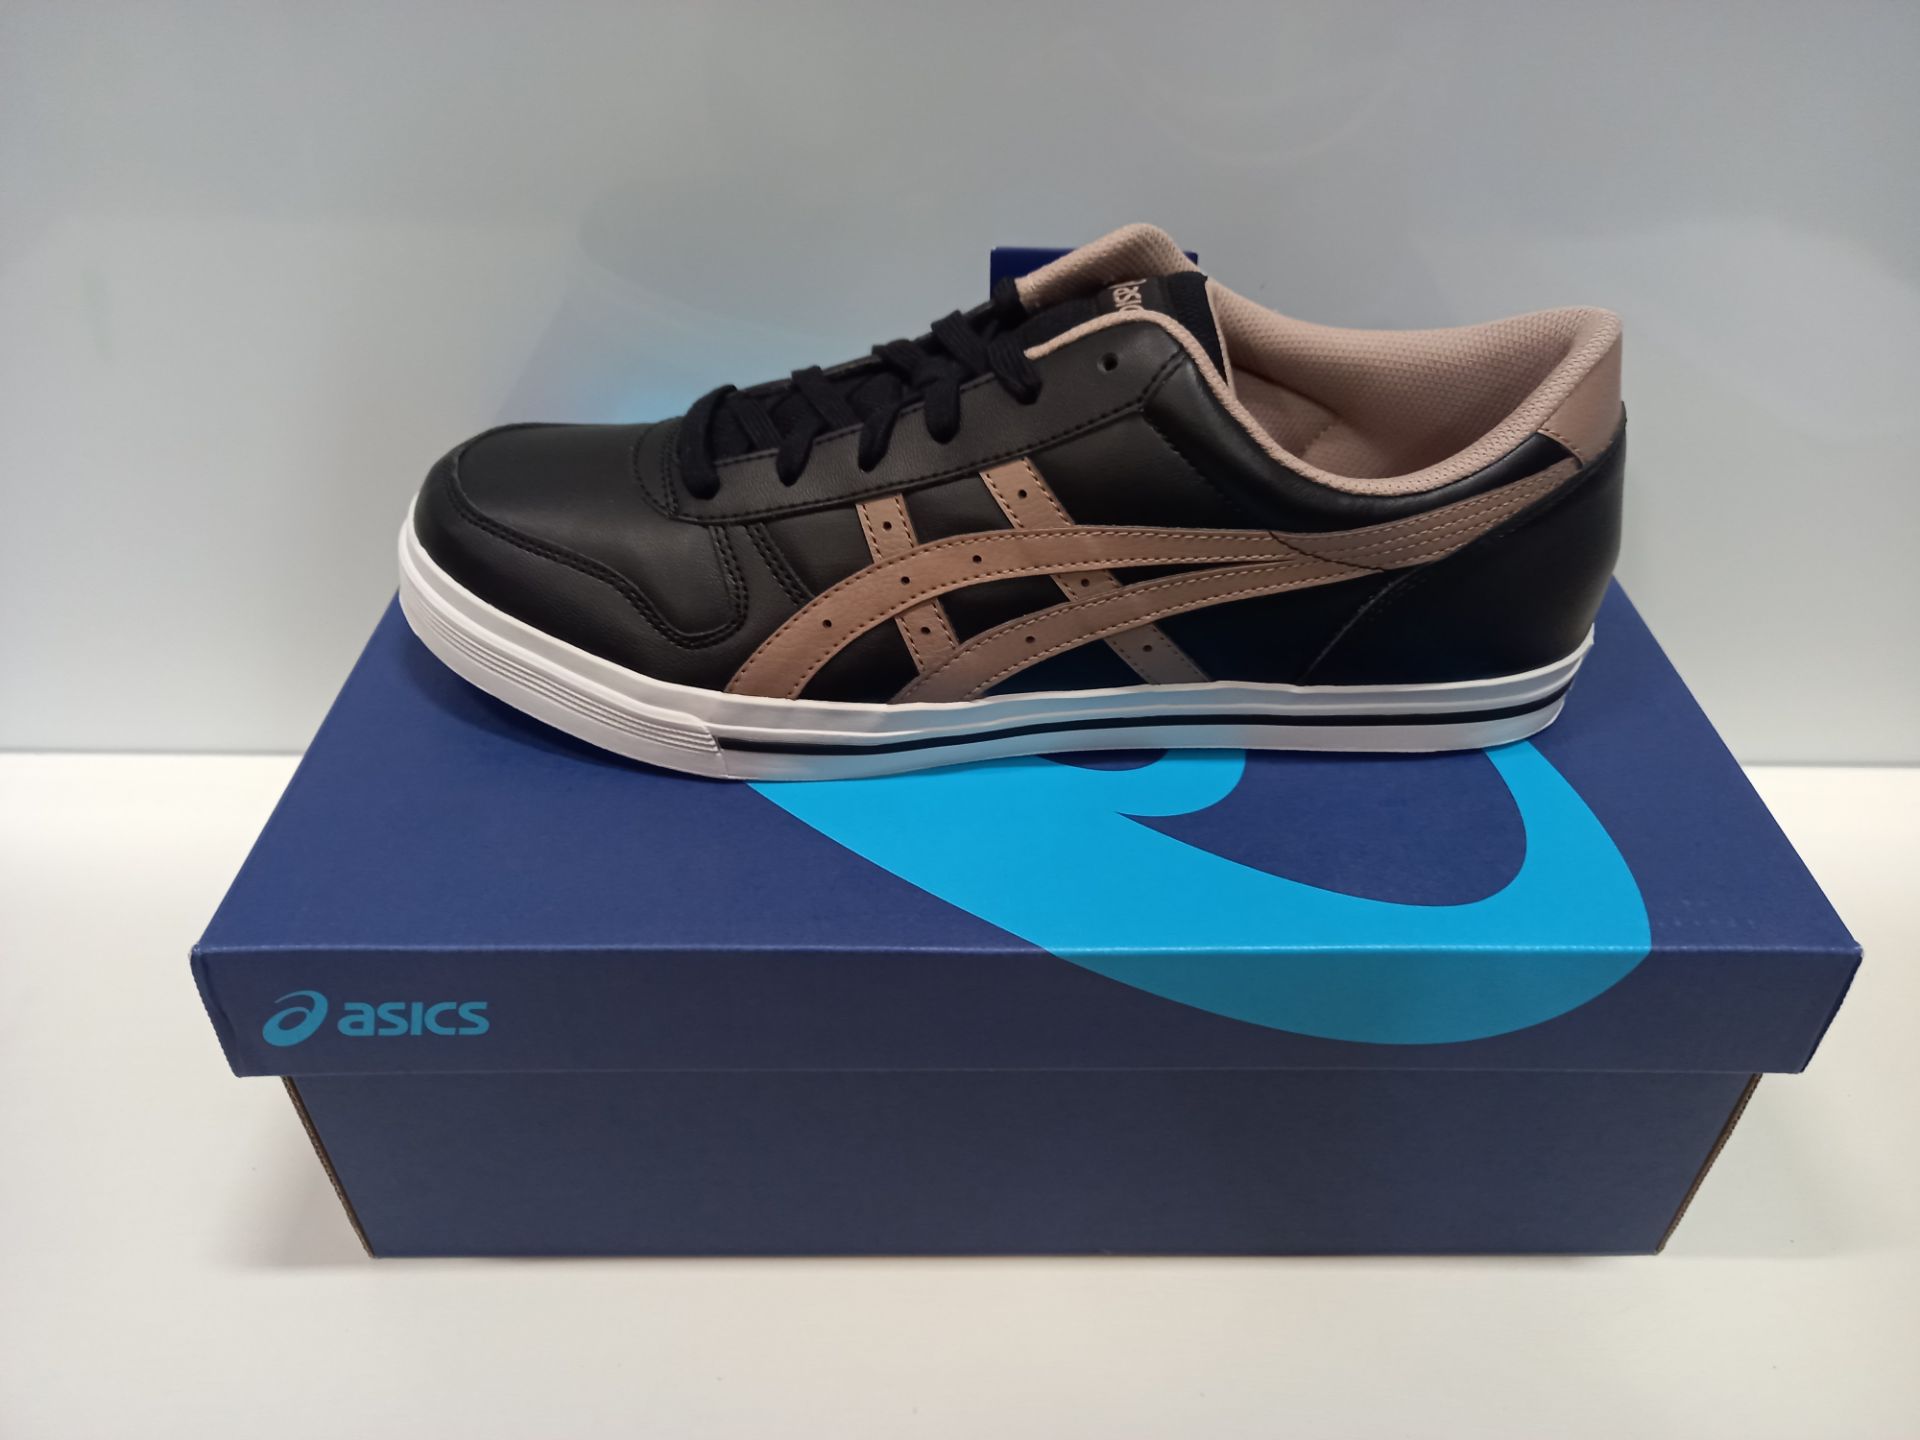 8 X BRAND NEW ASICS AARON BLACK /TAUPE GREY SHOES UK SIZE 11 1/2 AND 13